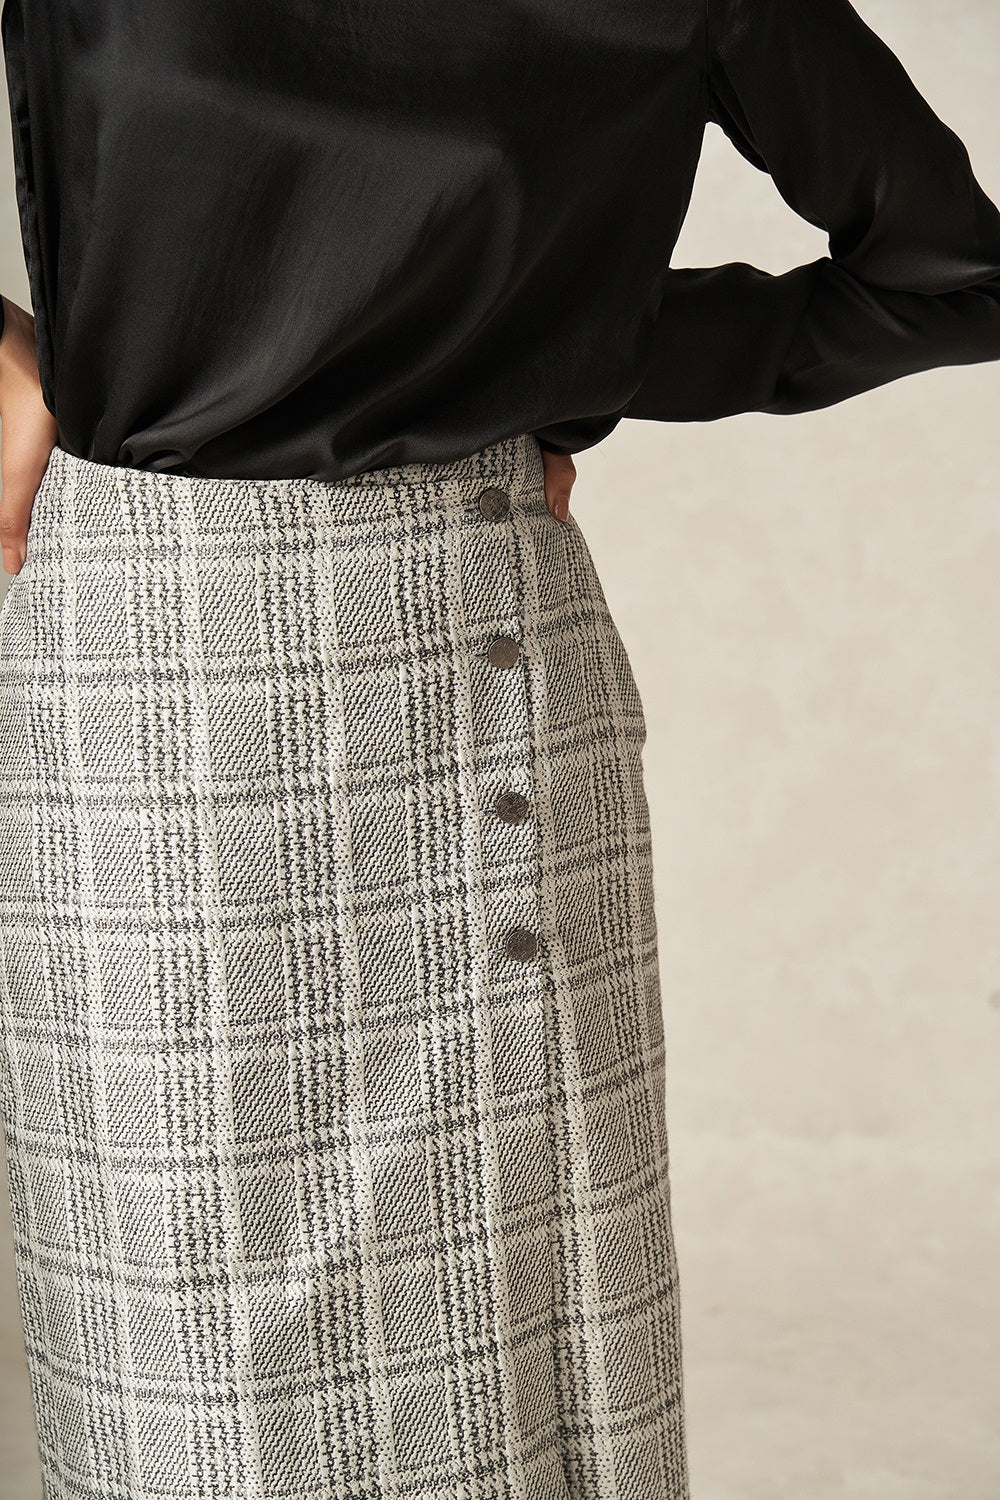 Black and White Pure Silk Handwoven Plaid Patterned Wrap Skirt